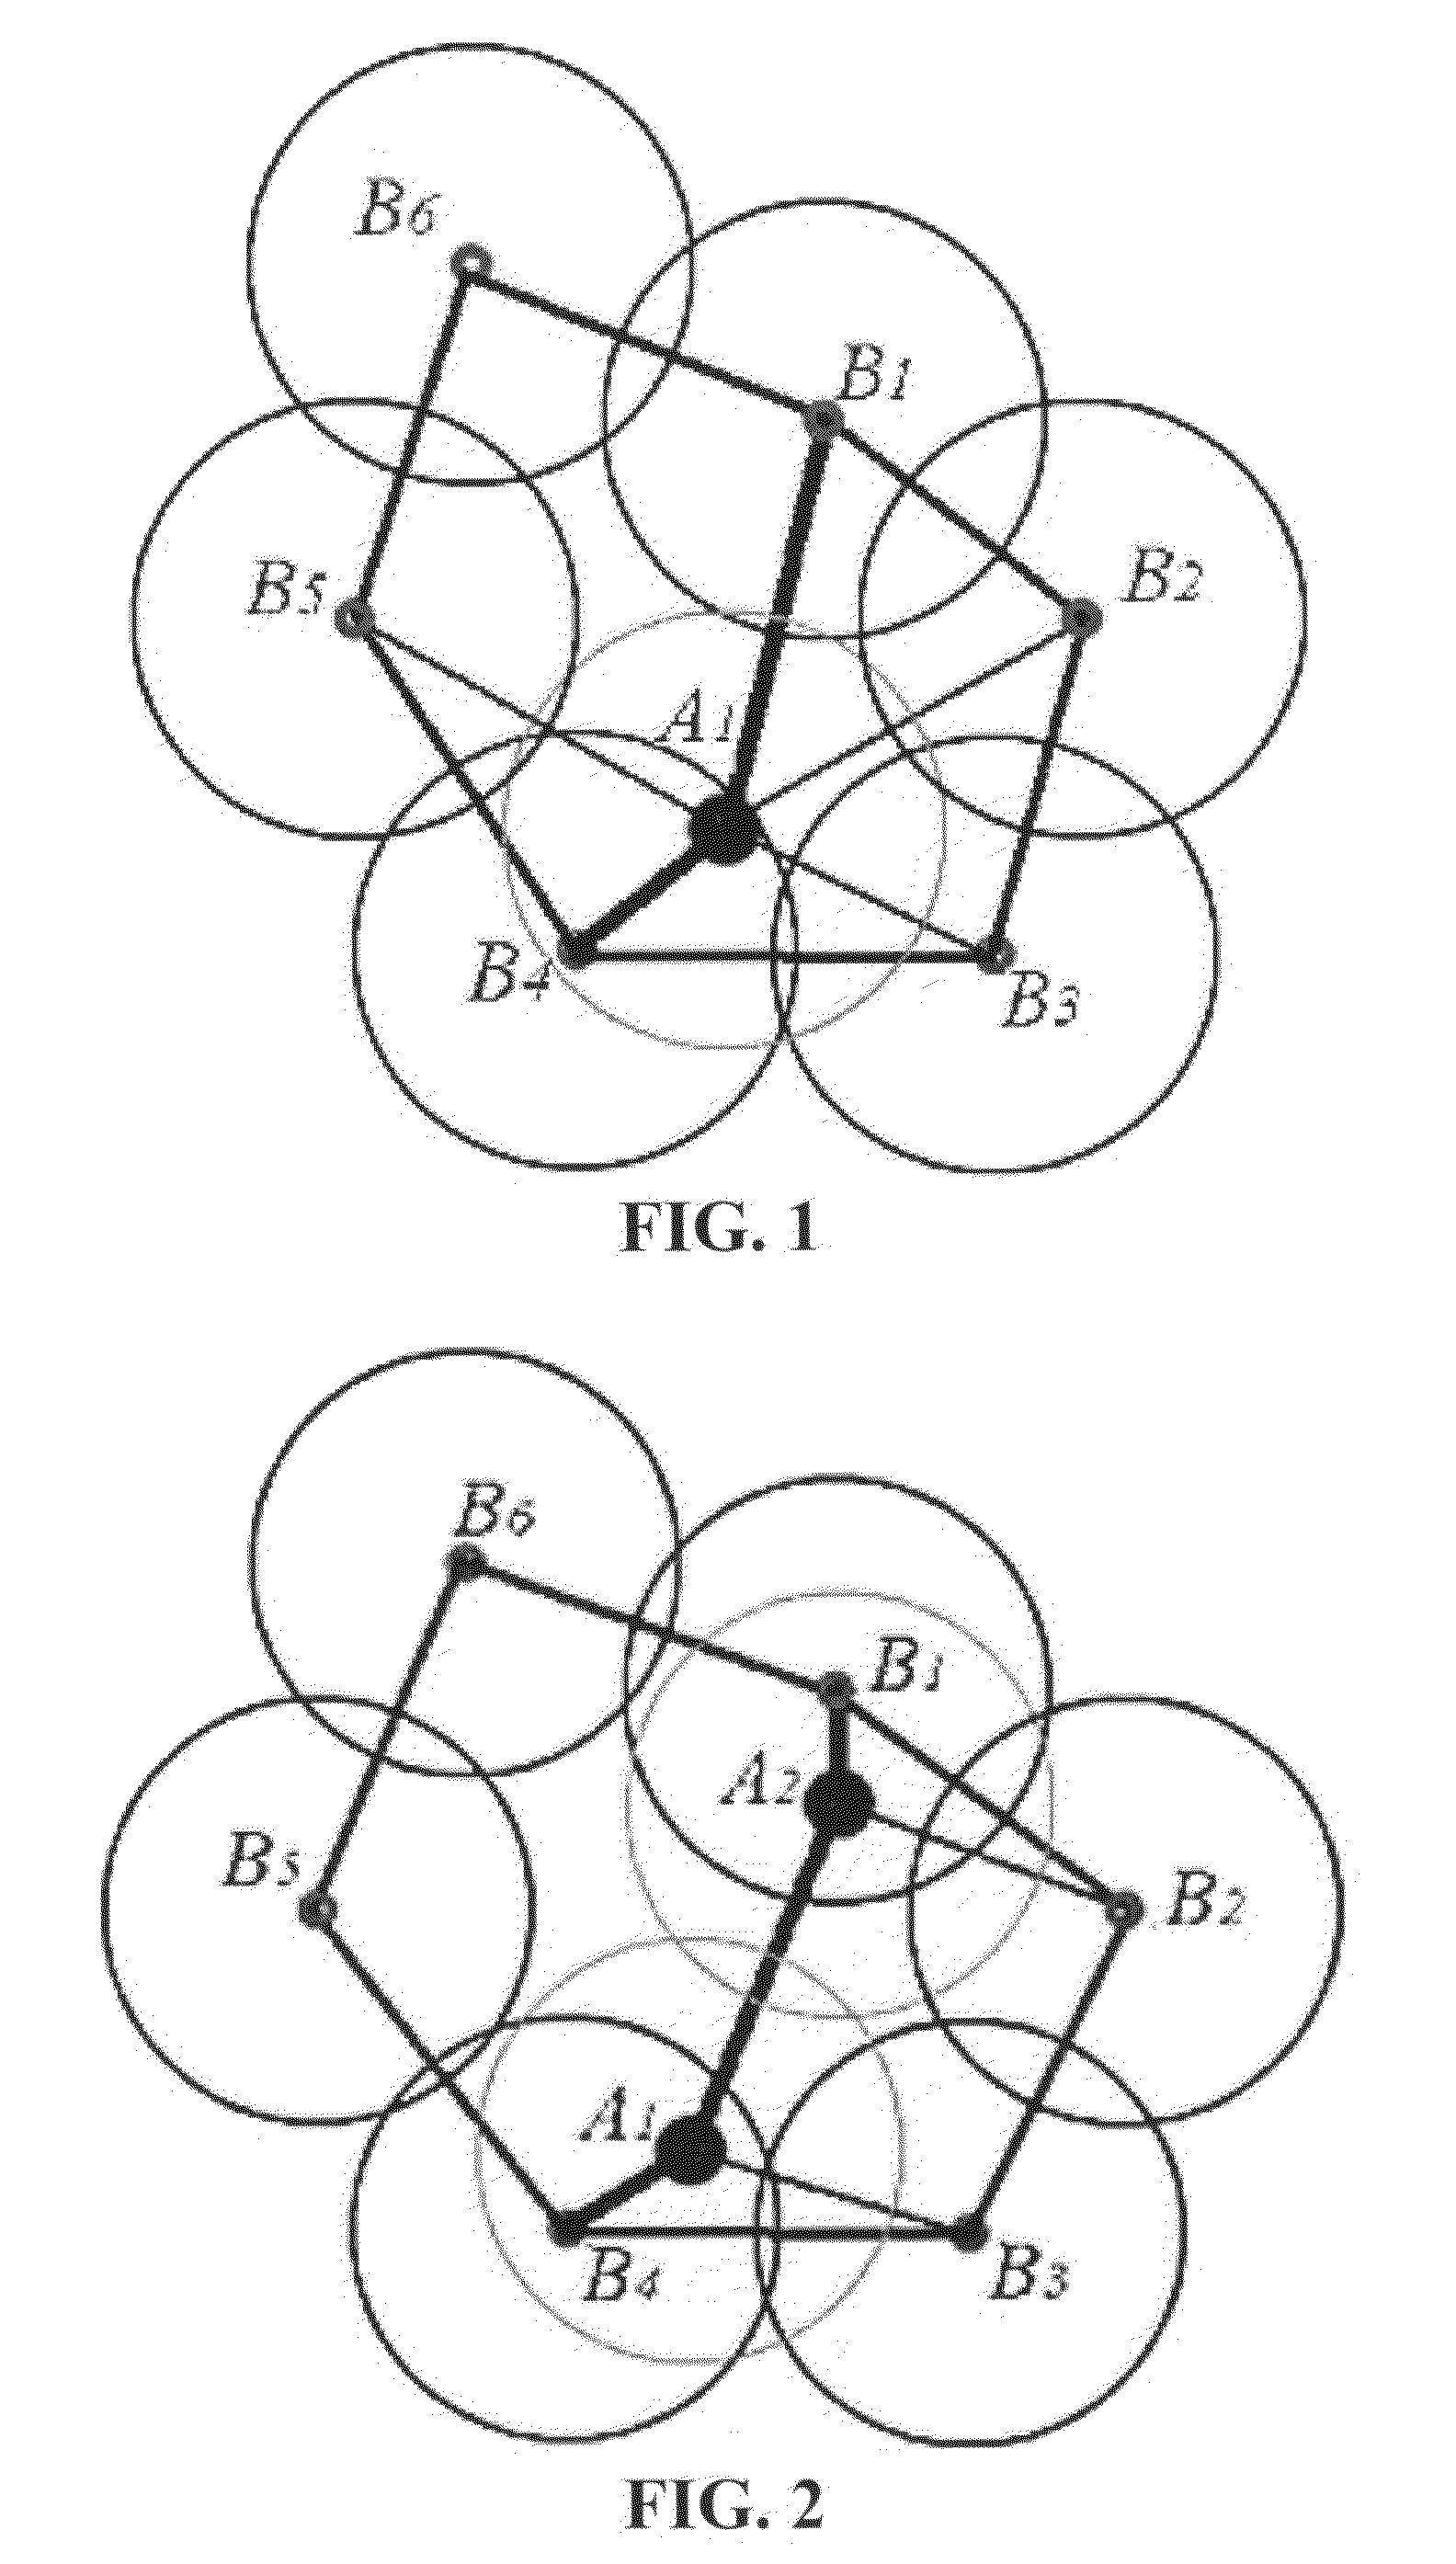 Distributed hole recovery process using connectivity information